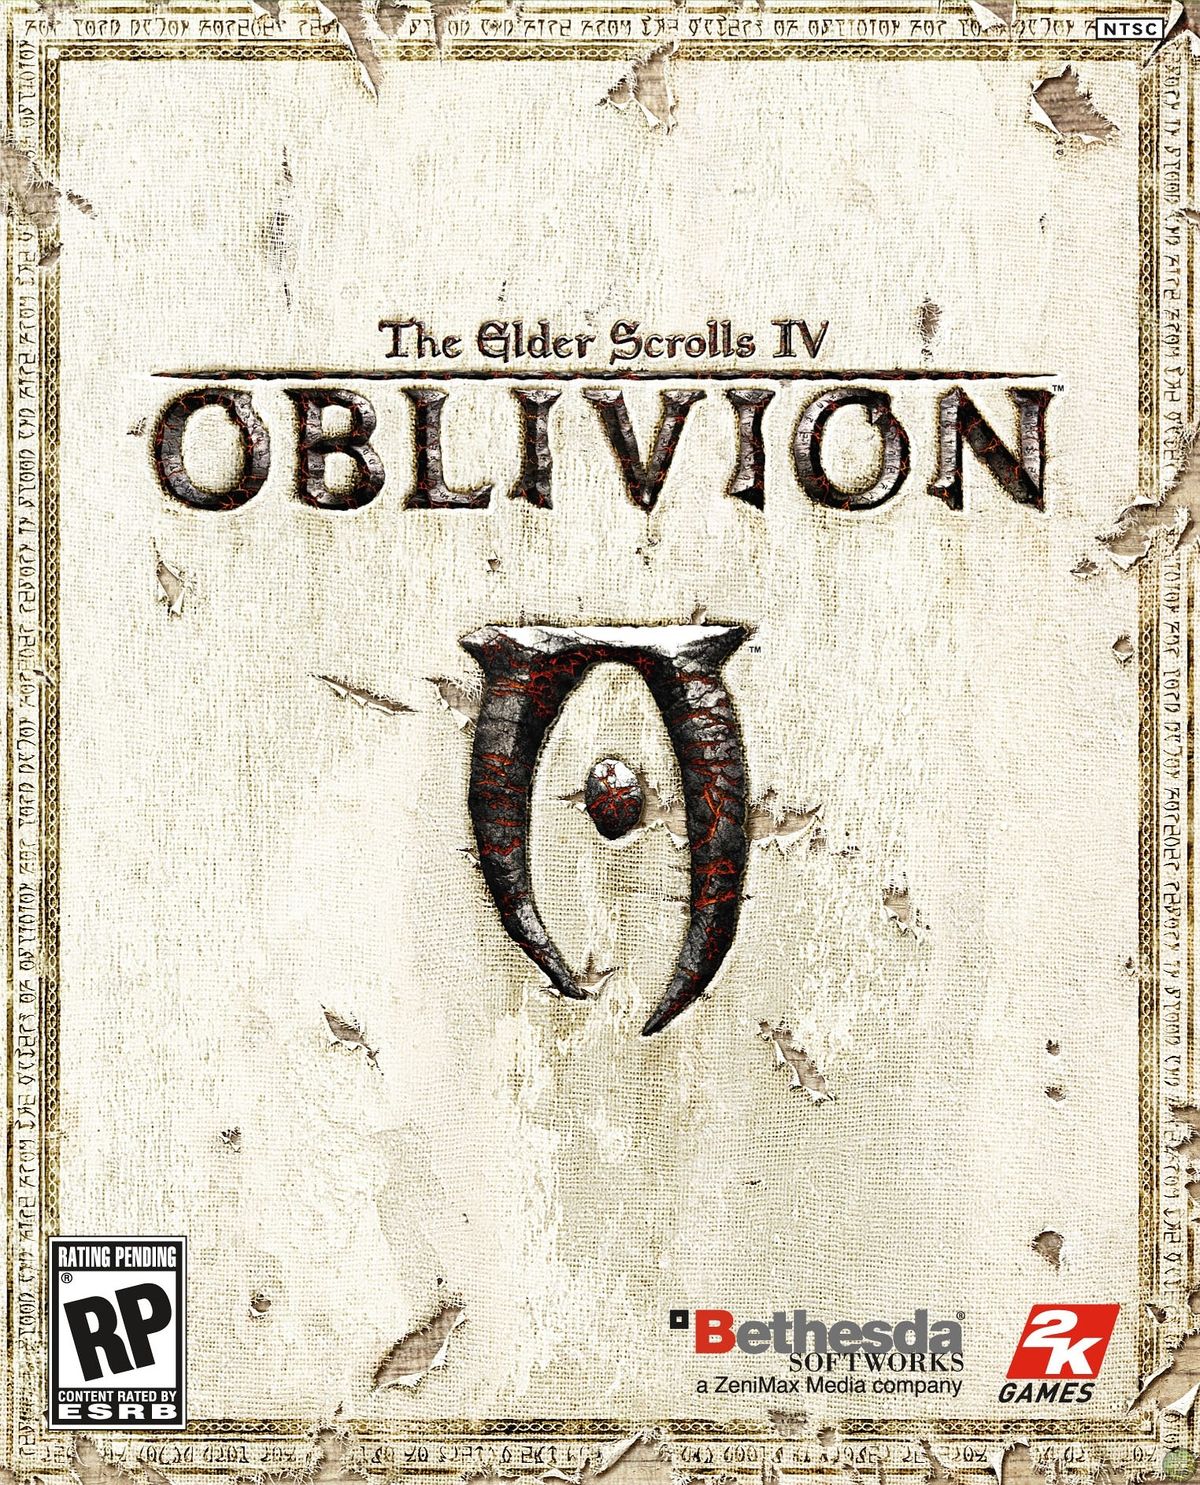 Microsoft documents leak new Bethesda games, including an Oblivion remaster  - The Verge